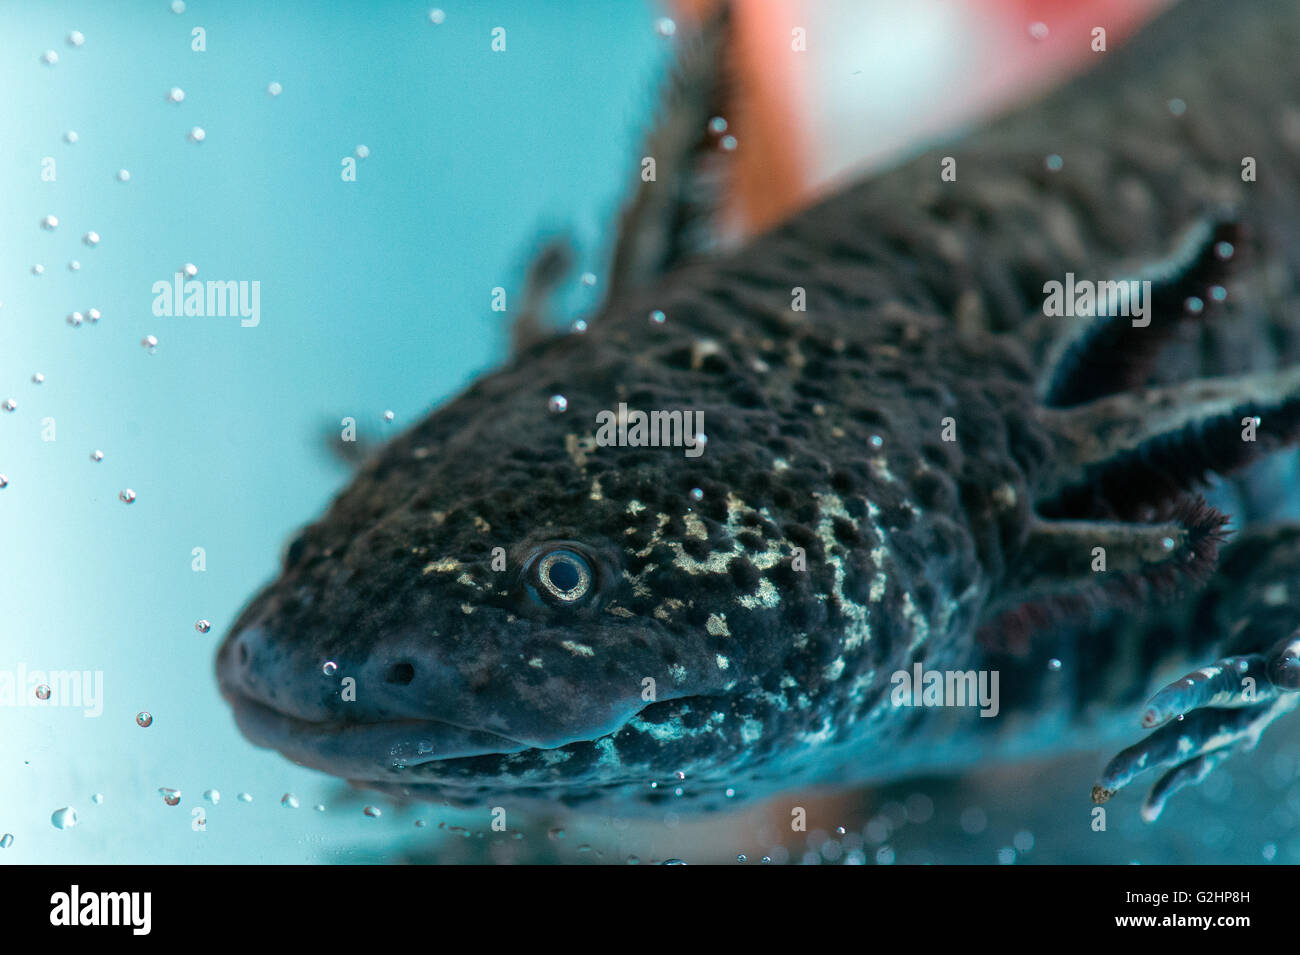 Dresden, Germany. 30th May, 2016. An axolotl (Ambystoma mexicanum), also known as a Mexican salamander or a Mexican walking fish, swims in a tank at the Center for Regenerative Therapies at the Technical University in Dresden, Germany, 30 May 2016. Scientists at the Technical University in Dresden use the axolotl to conduct research on regenerative therapy options. PHOTO: ARNO BURGI/DPA/Alamy Live News Stock Photo